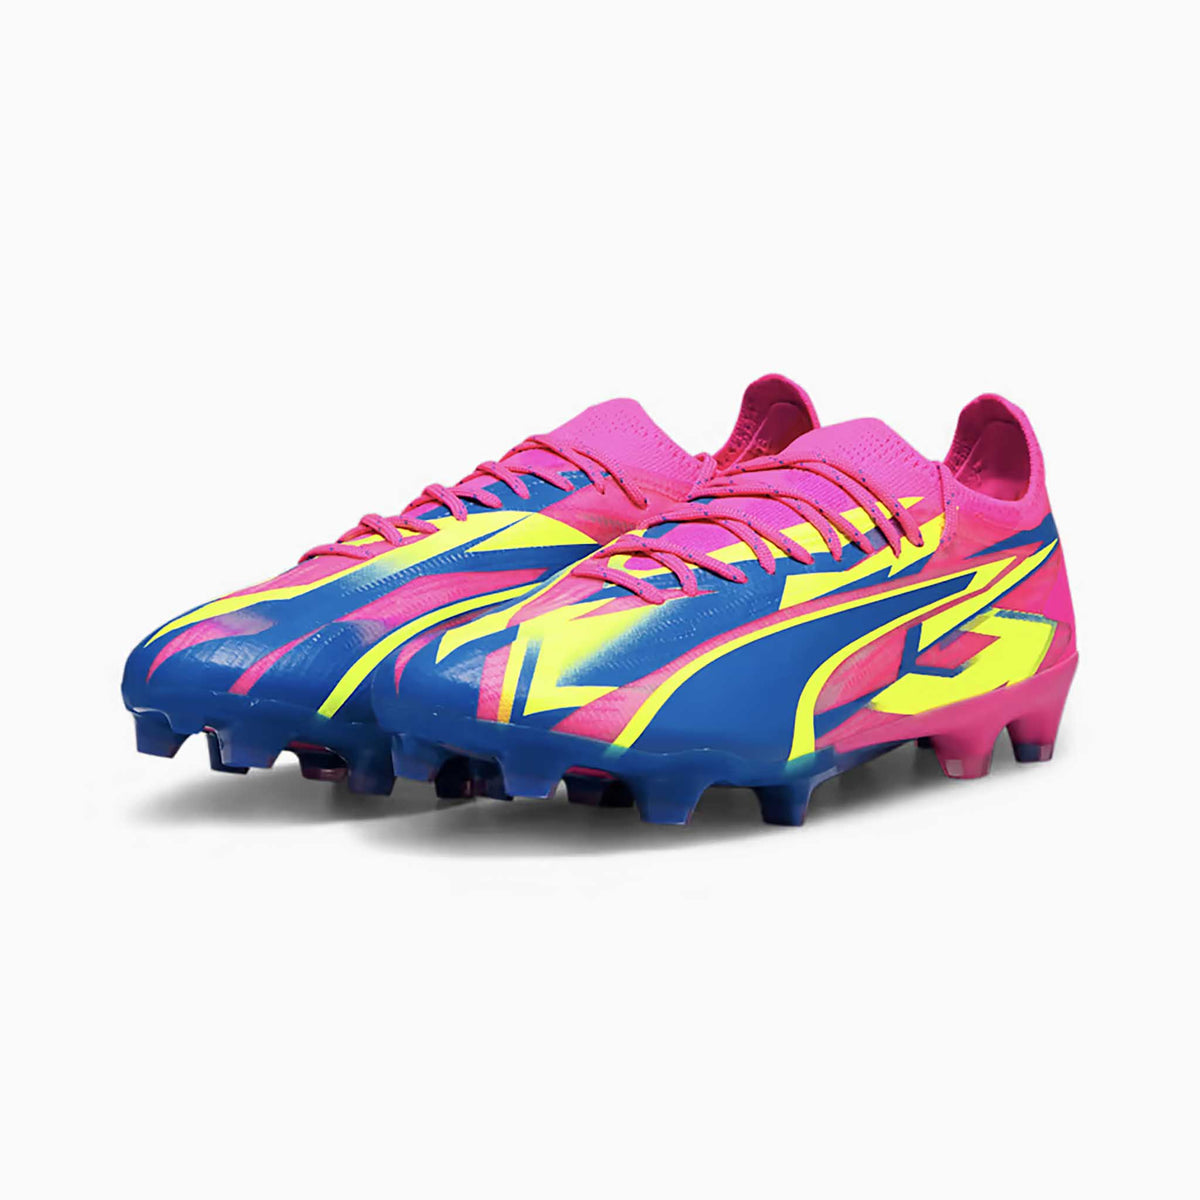 Puma Ultra Ultimate Energy FG/AG chaussures de soccer a crampons paire- Pink / Ultra Blue / Yellow Alert